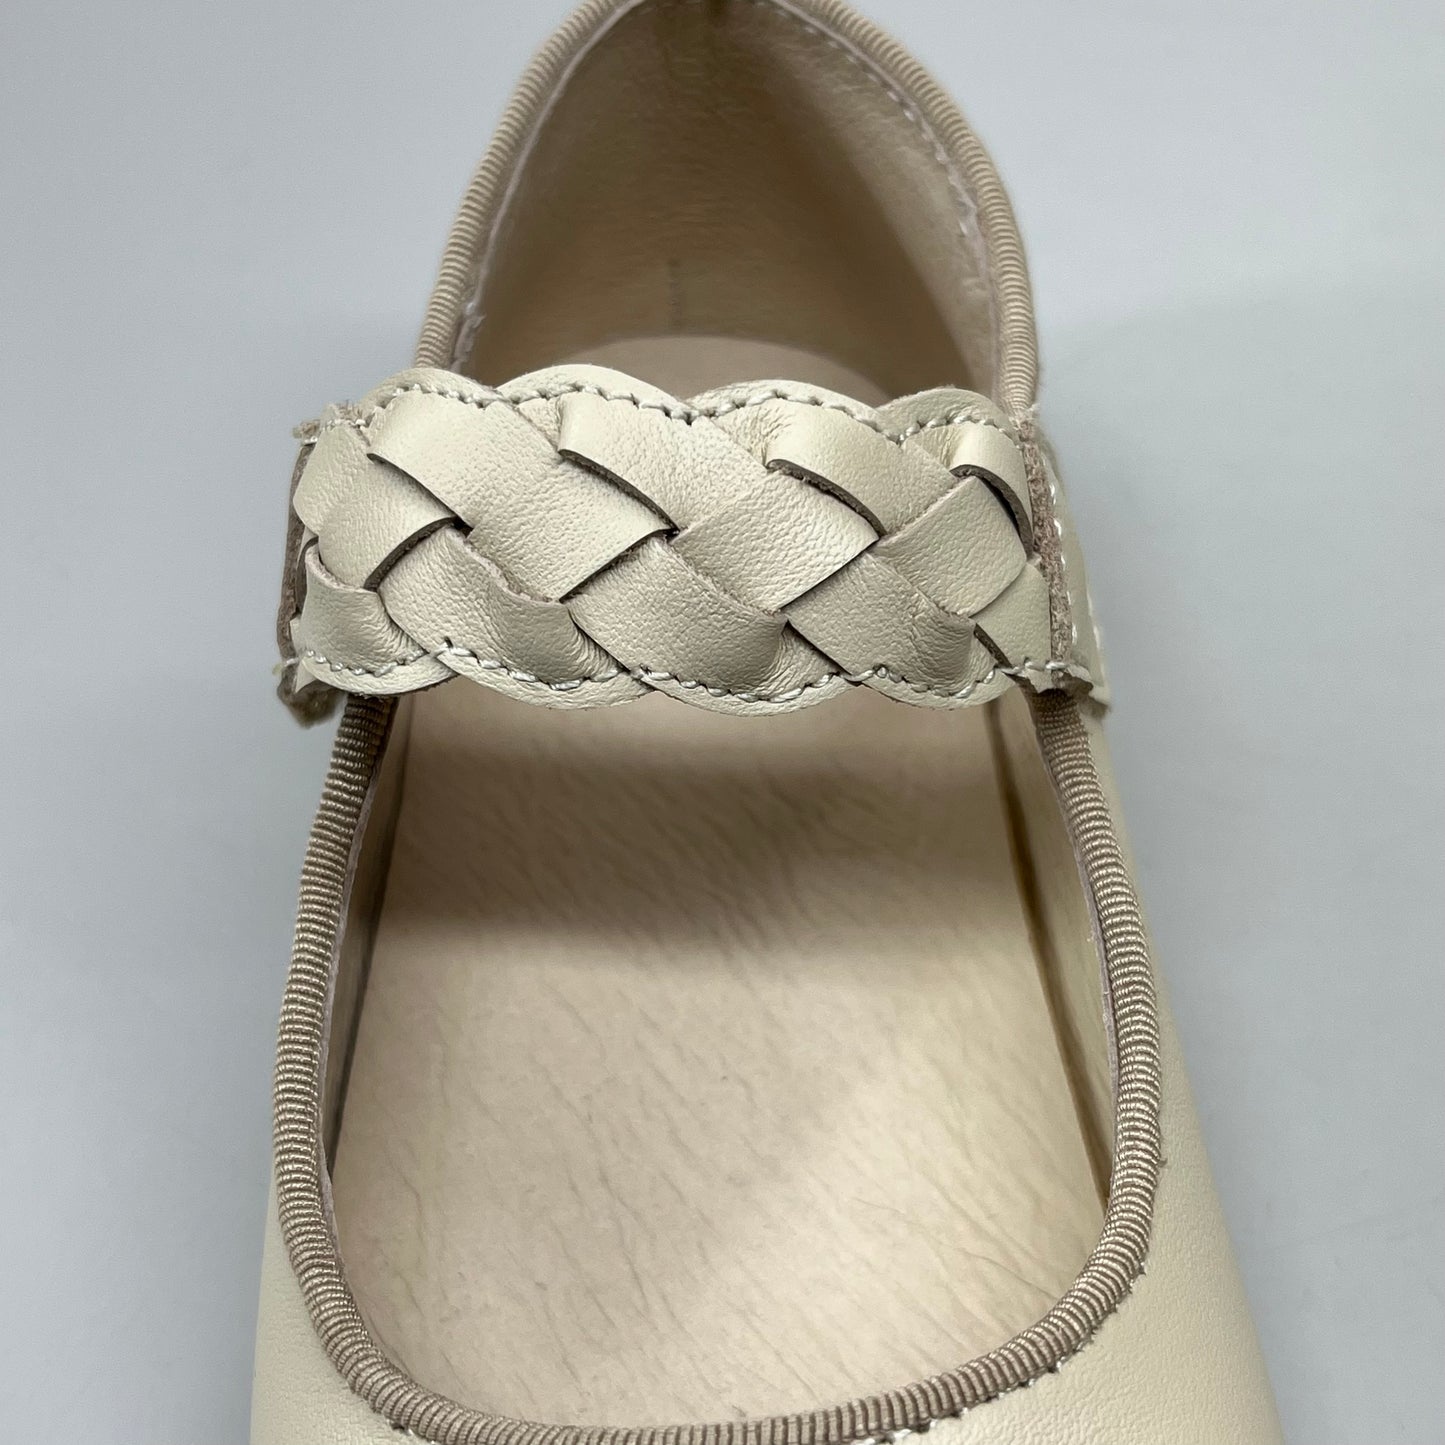 OLD SOLES Lady Plat Braided Strap Leather Shoe Kid’s Sz 33 US 1.5 Cream #817